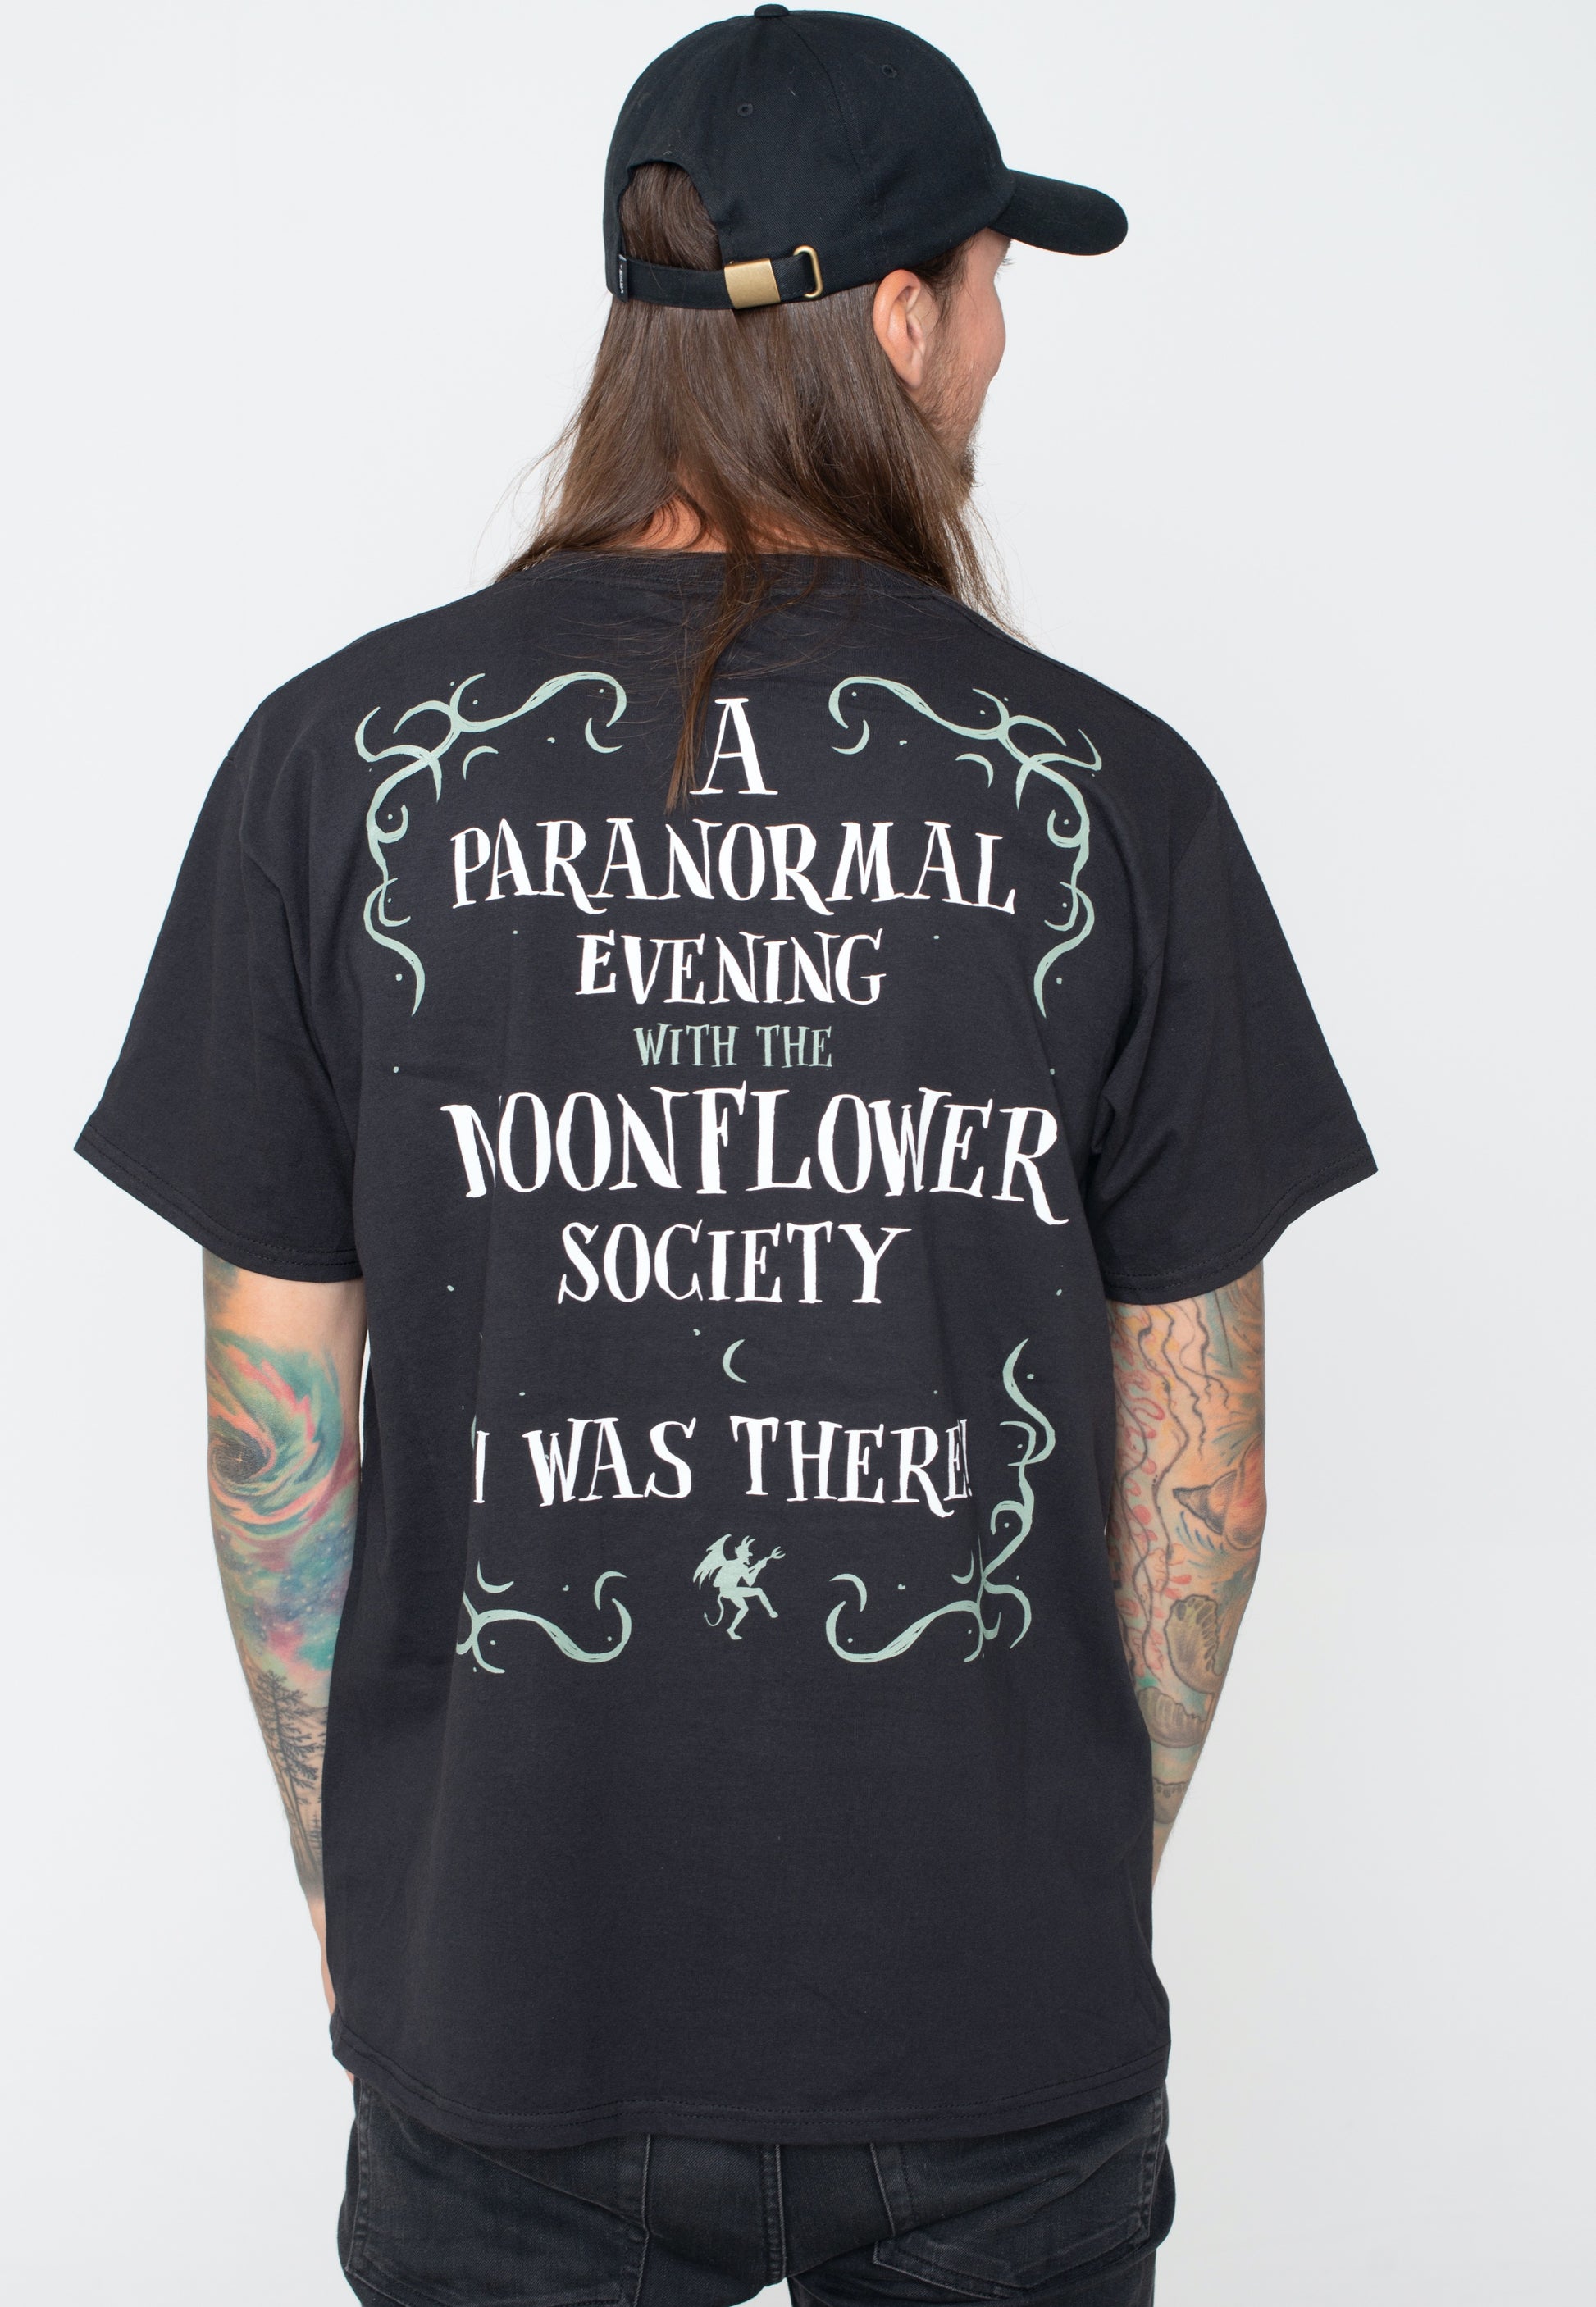 Avantasia - A Paranormal Evening With The Moonflower Society Cover - T-Shirt